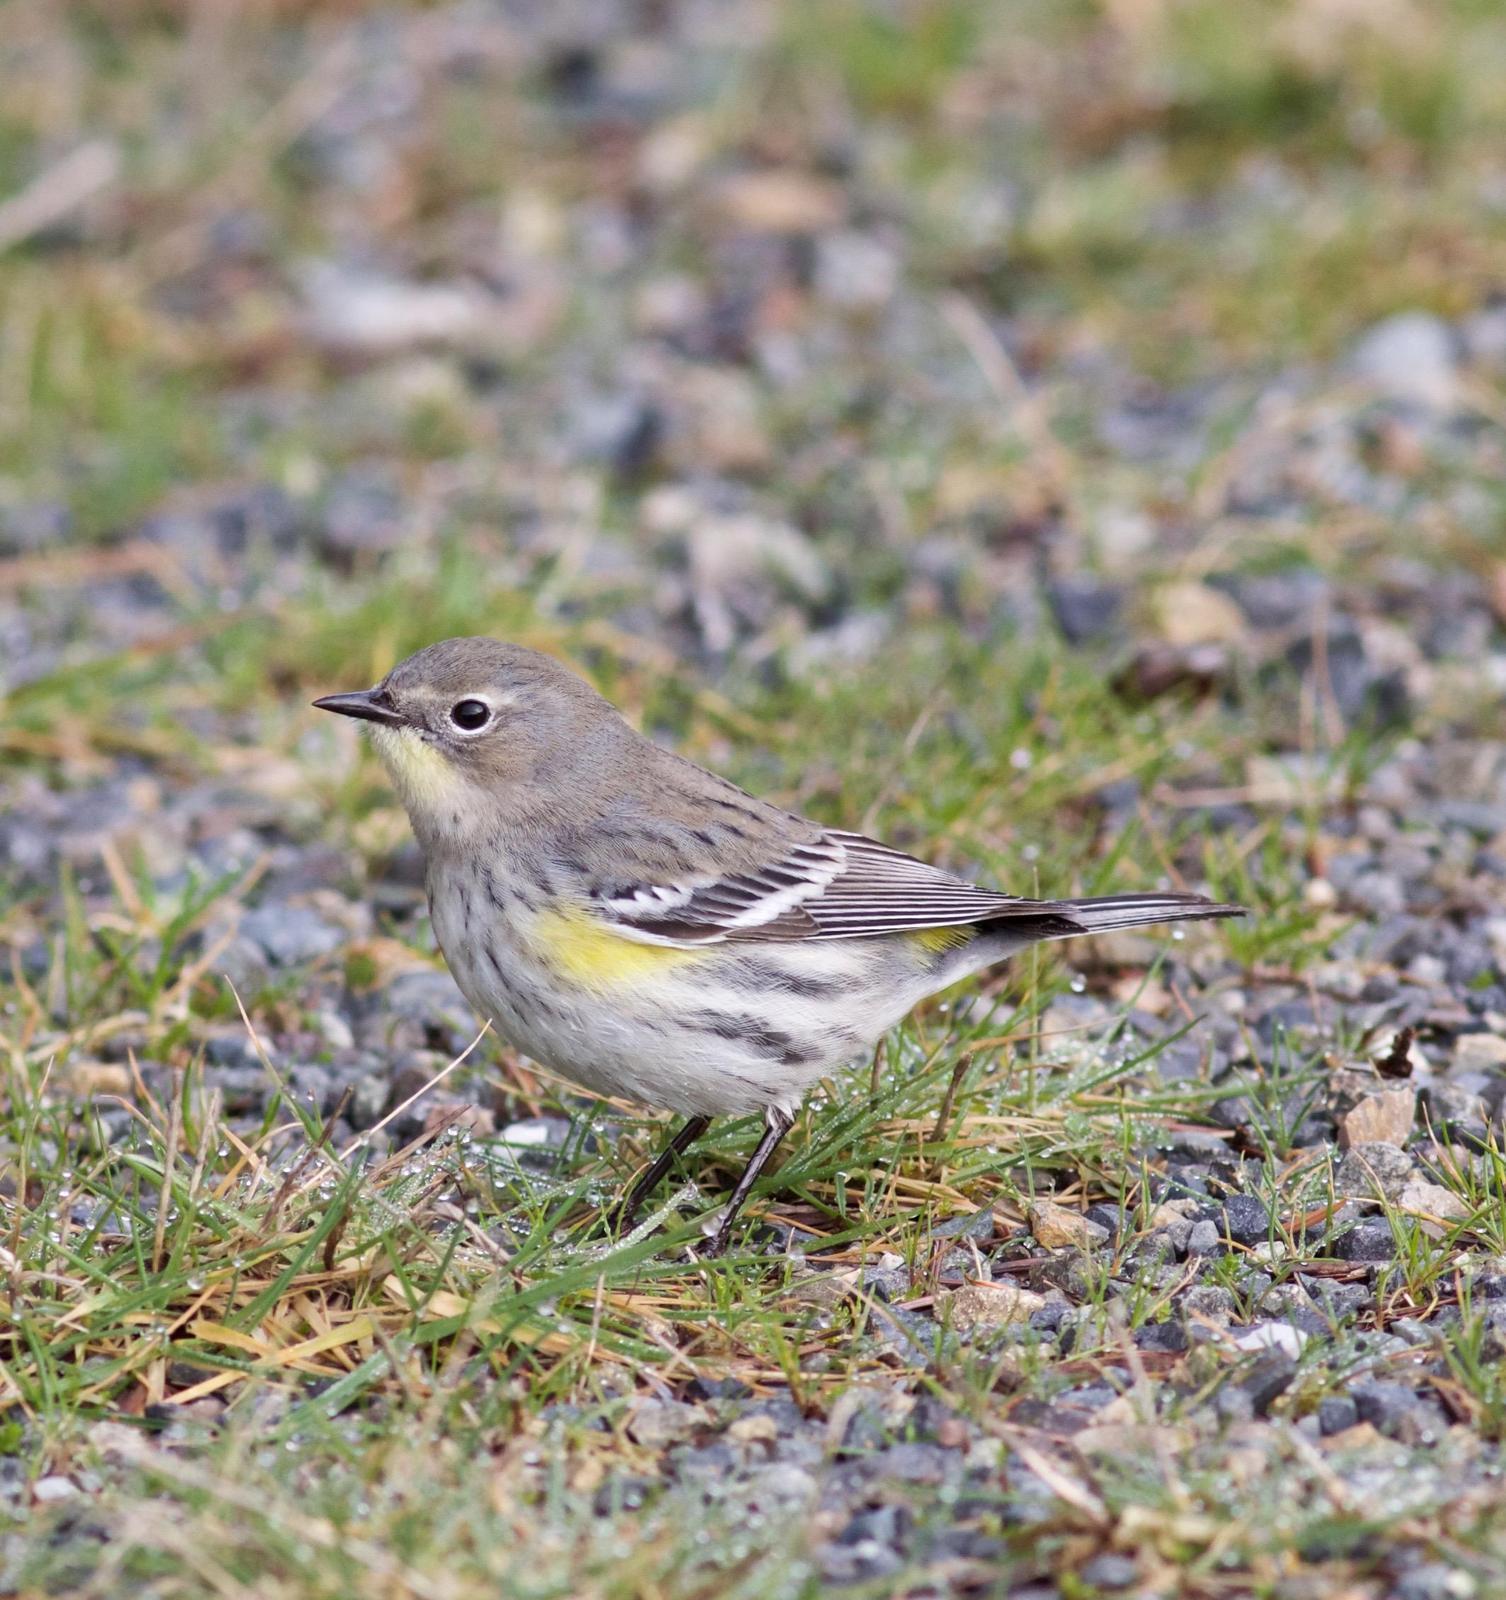 Yellow-rumped Warbler Photo by Kathryn Keith